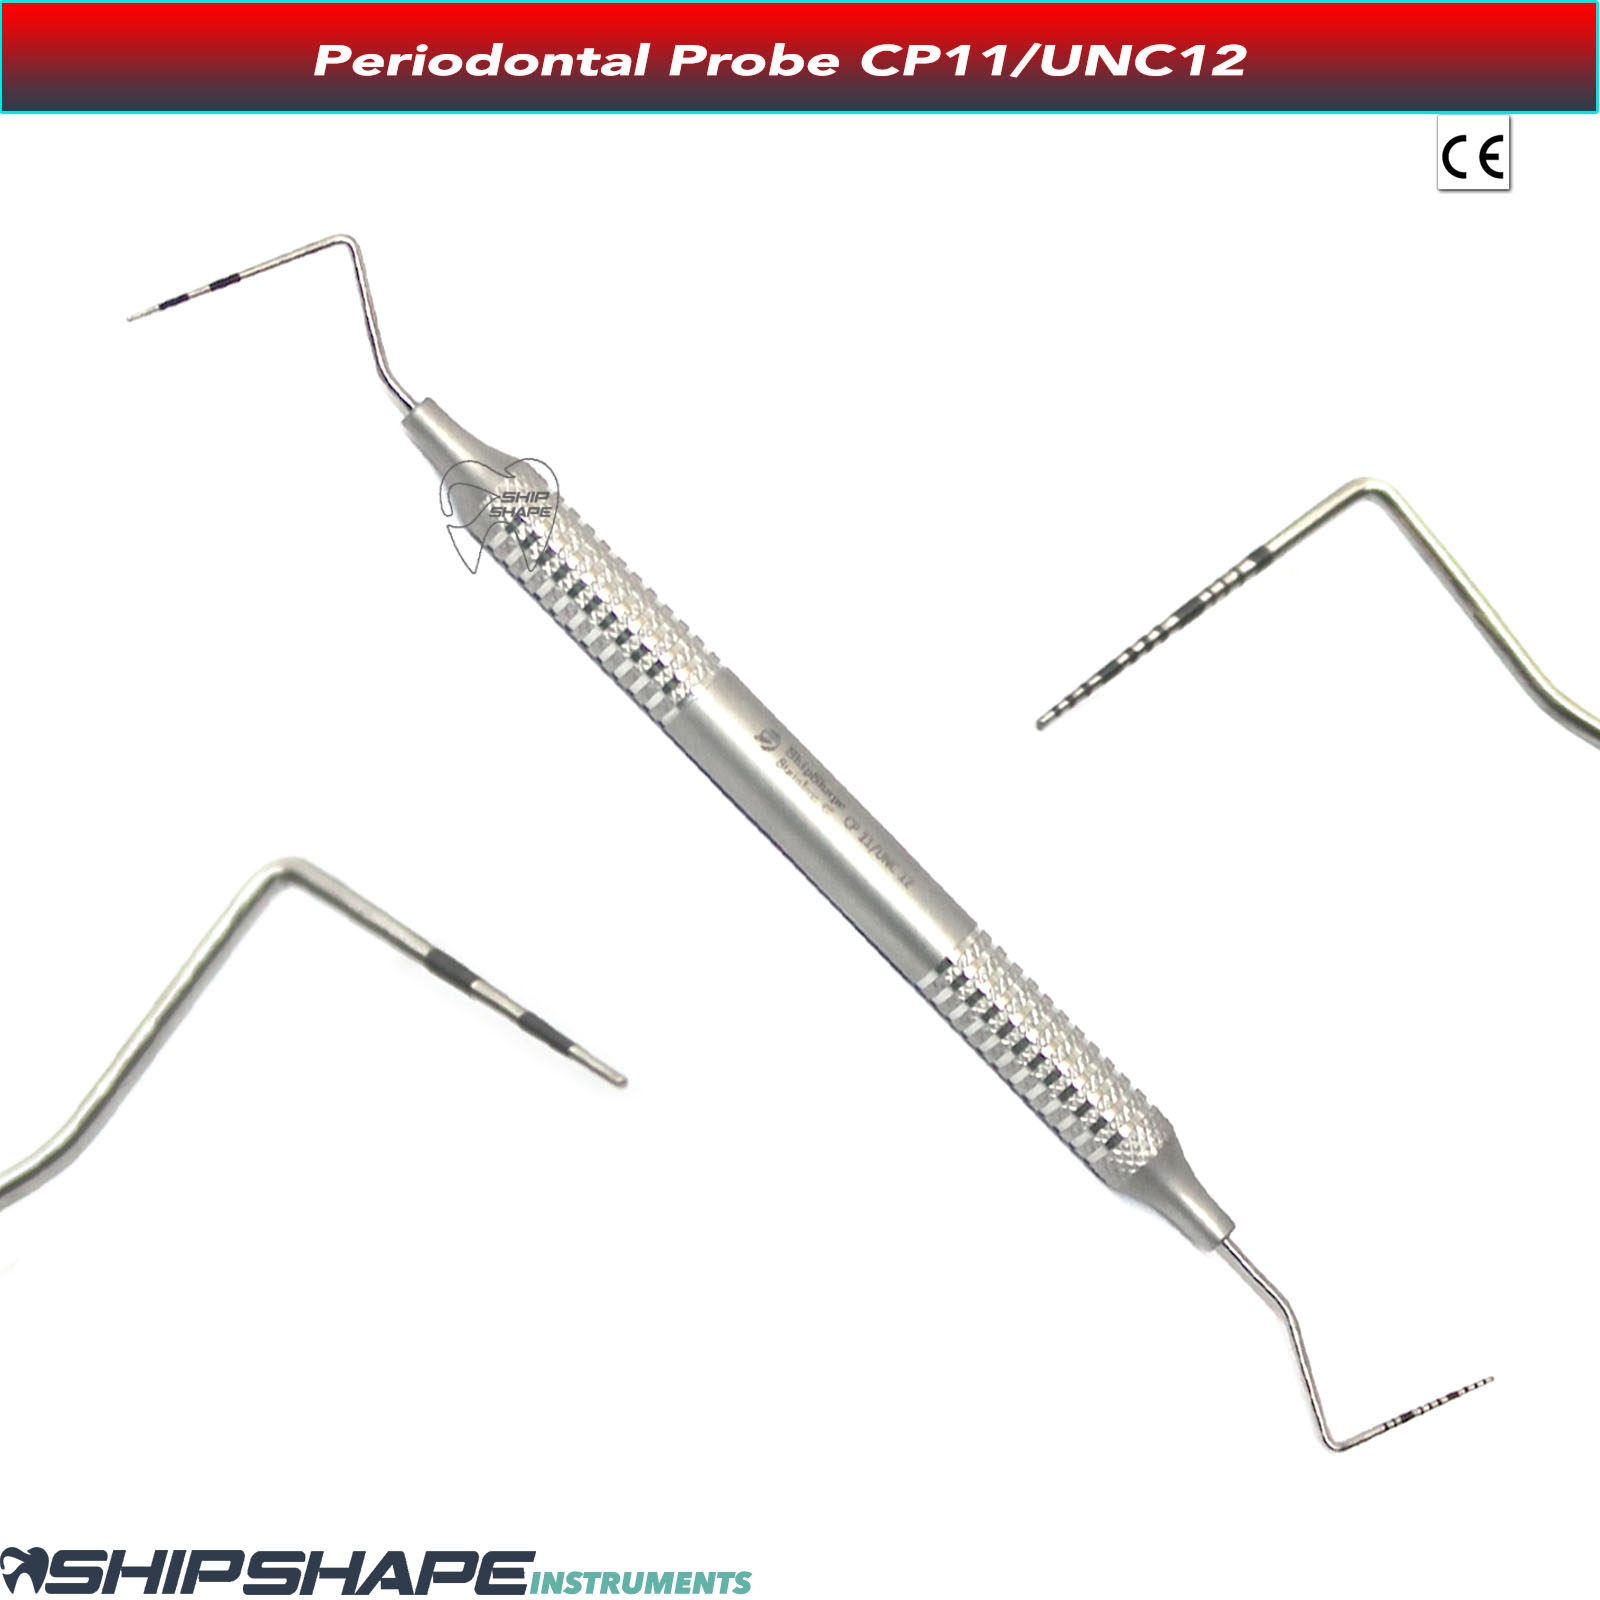 Dental Probe CP11 / UNC12 Color Coded Marking Periodontal Diagnostic | Shipshape Instruments-1362